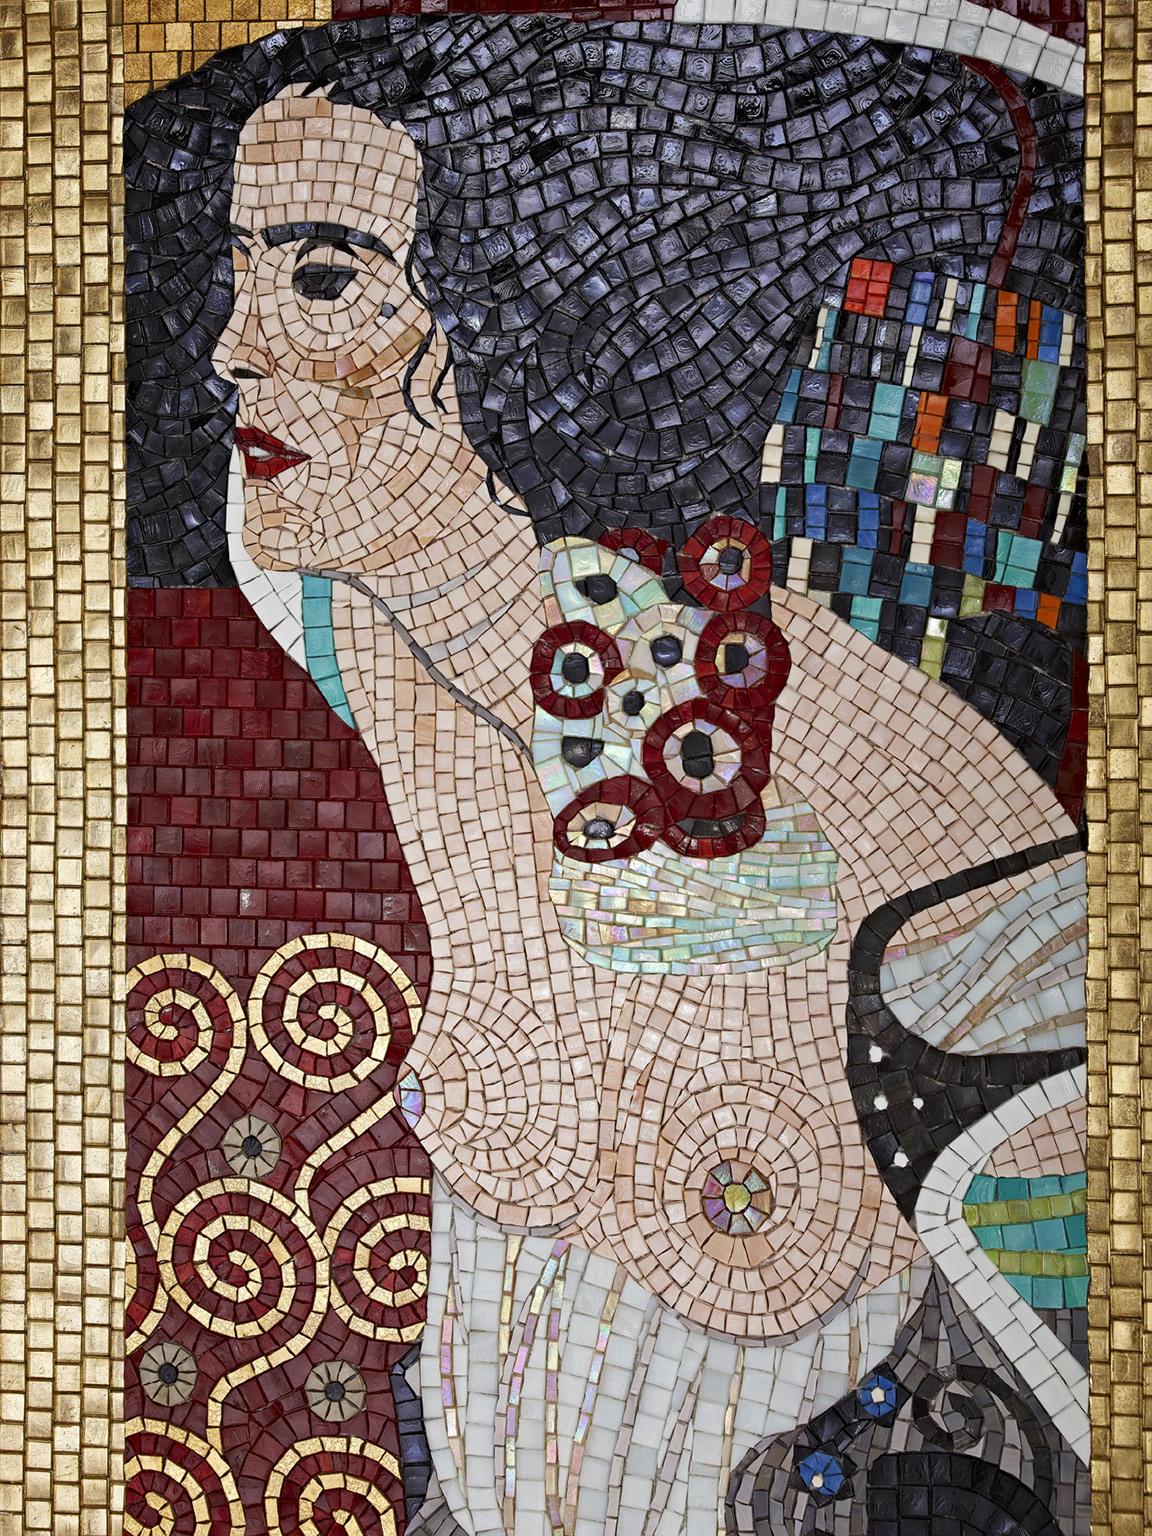 Making Artistic Mosaic, design of unparalleled beauty, inventing ' tromp l'oeil' thanks to the endless colors of the glass mosaic collections, all this allowed us to produce and divulge in all the world the preciousness of the mosaic as an